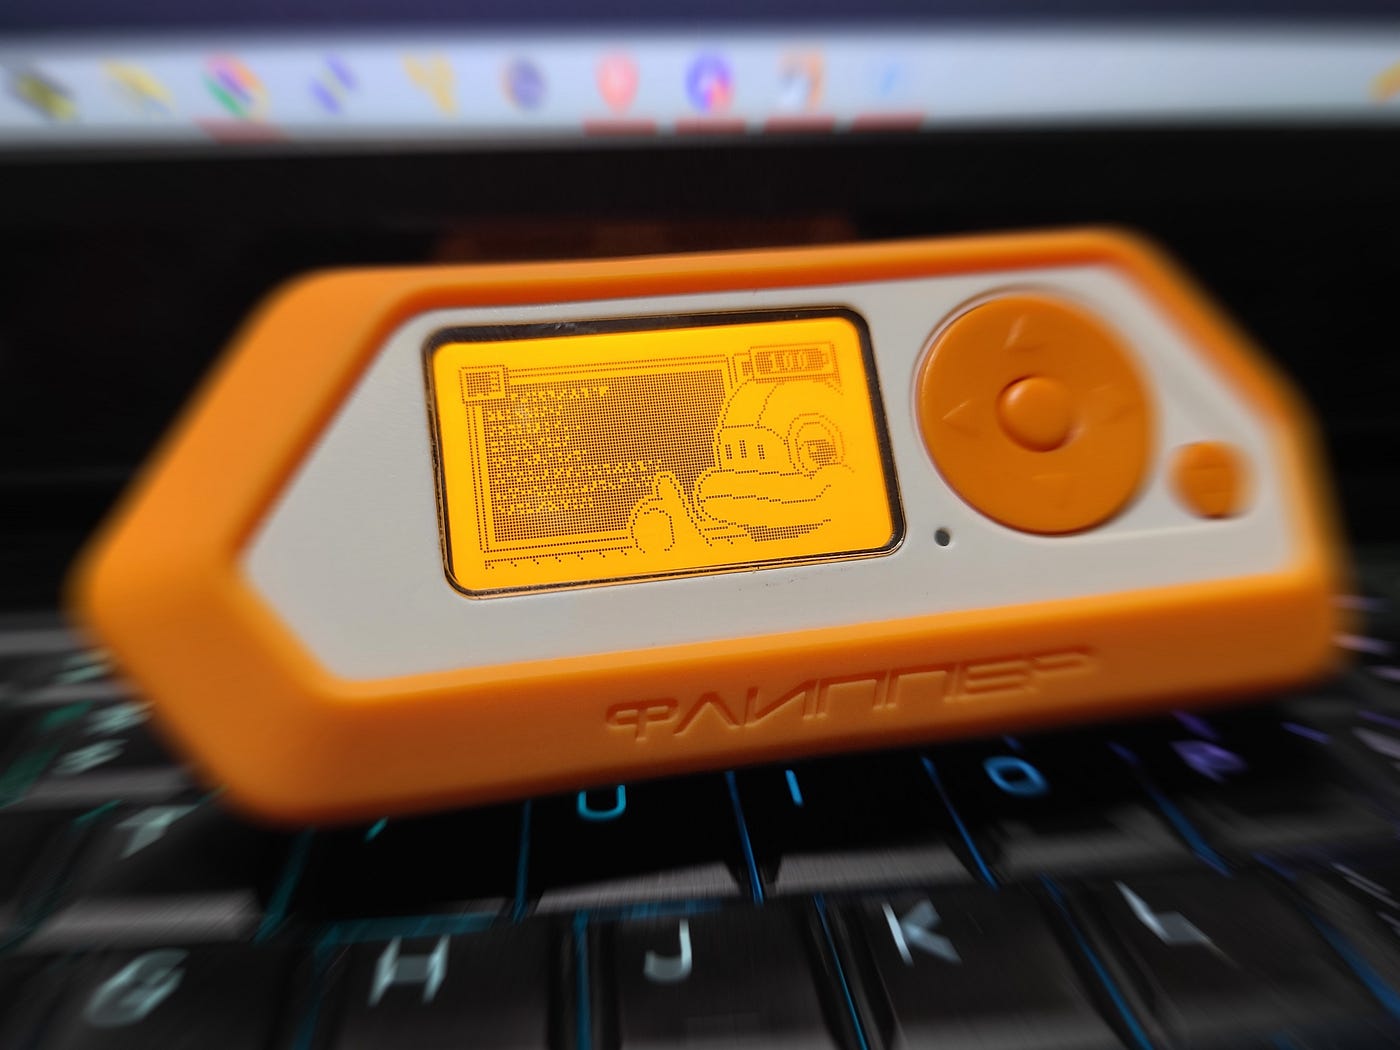 Why You Should Consider Buying a Flipper Zero Now, by Alex Szabo